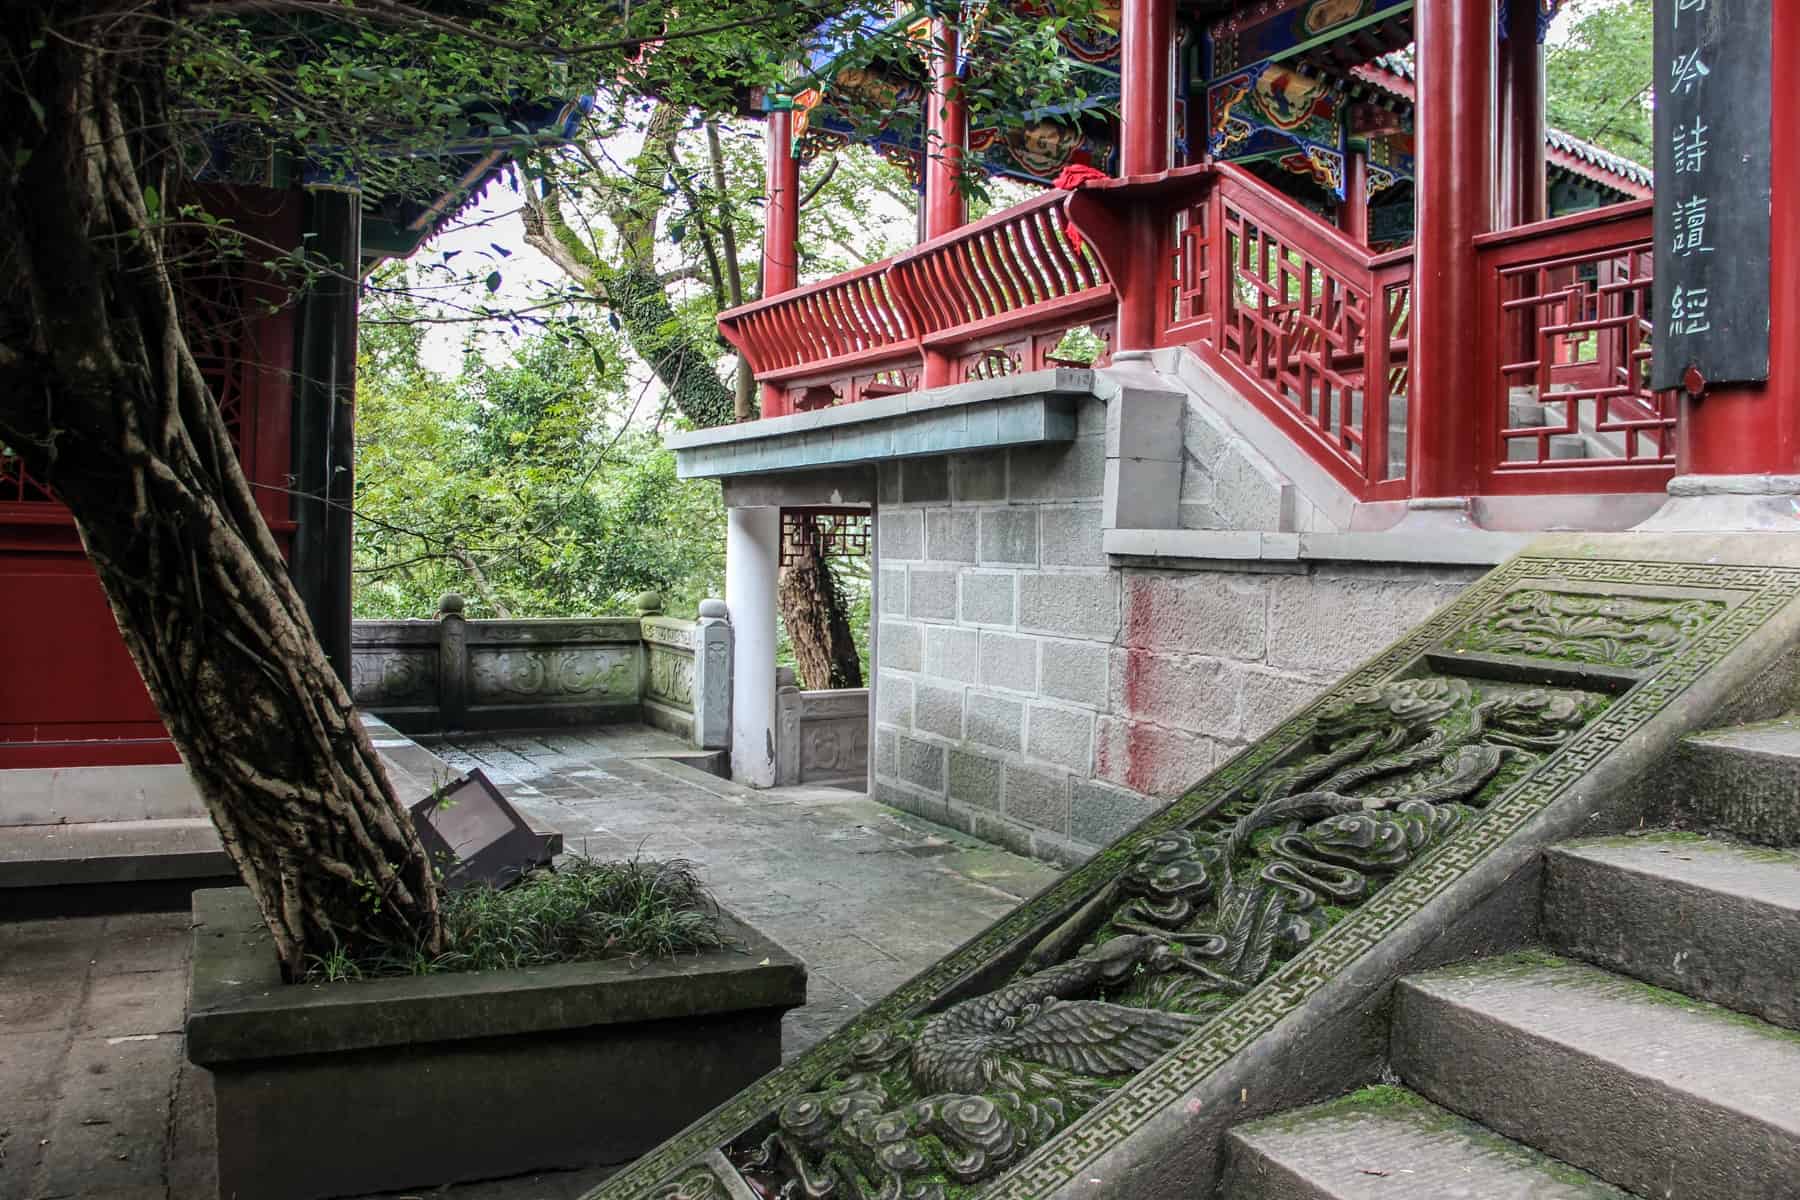 The etched stone staircase and red railings of a temple pagoda in Fengdu Ghost City in China